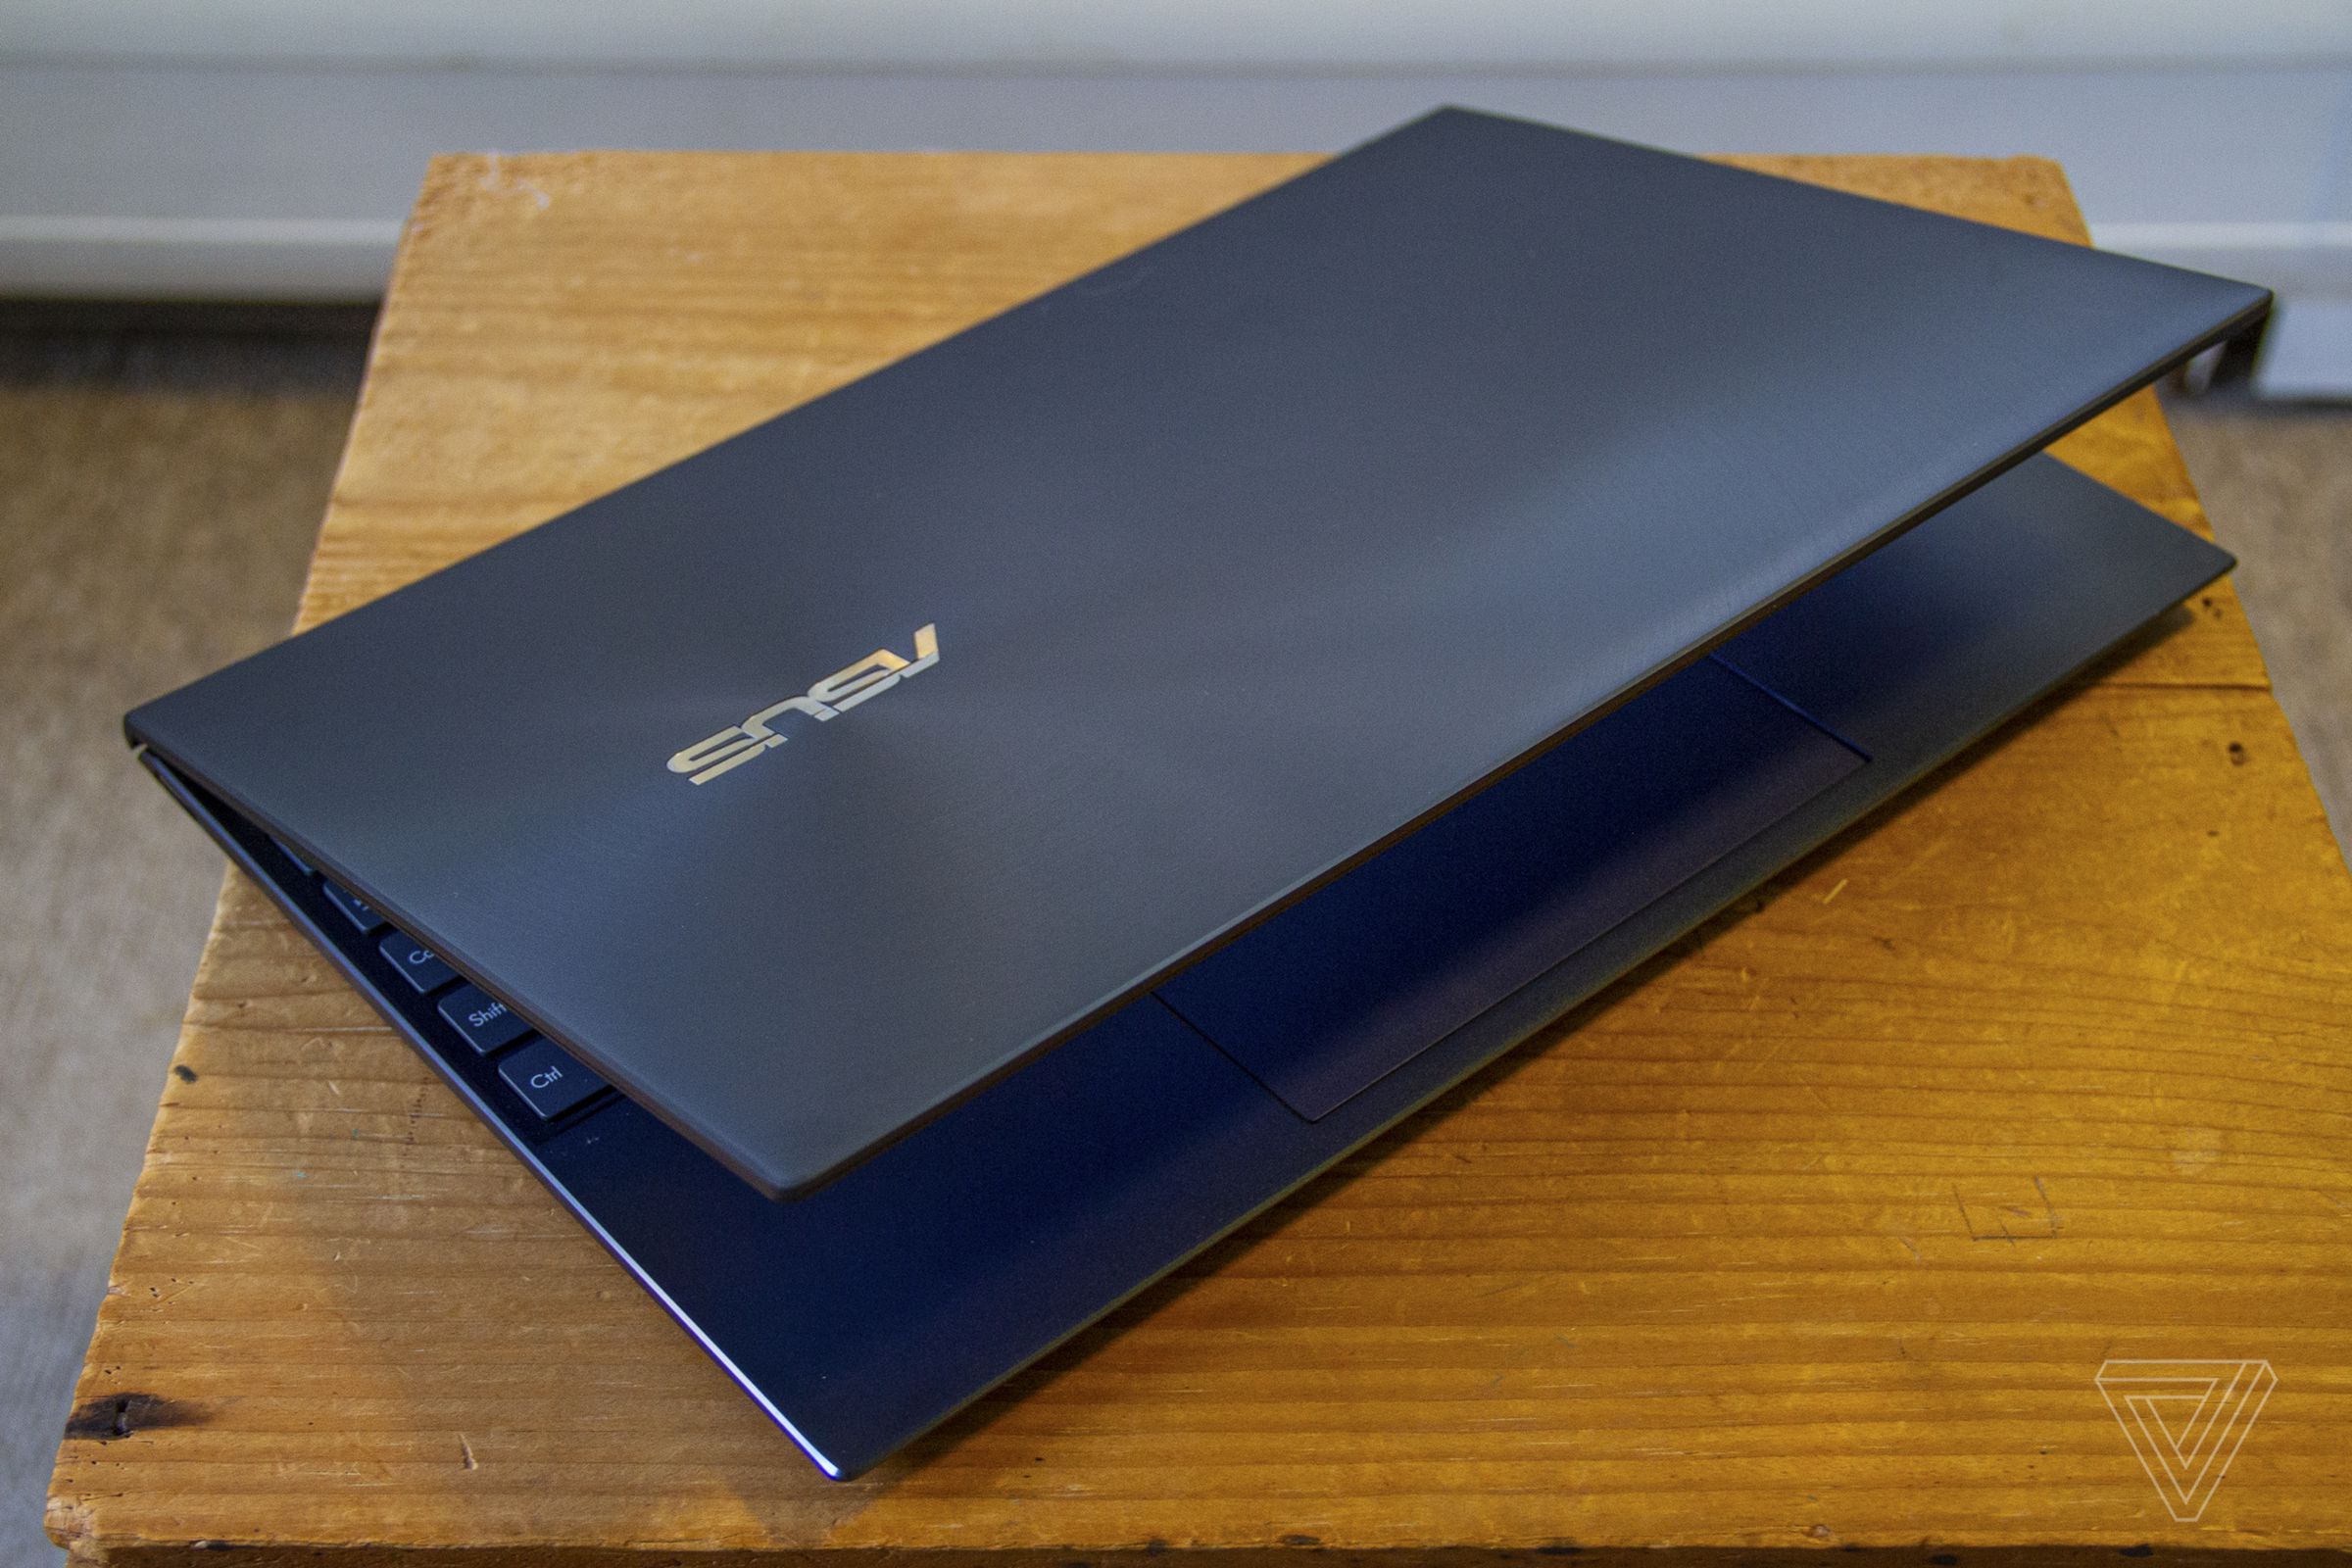 The Asus Zenbook 14 half closed from above.